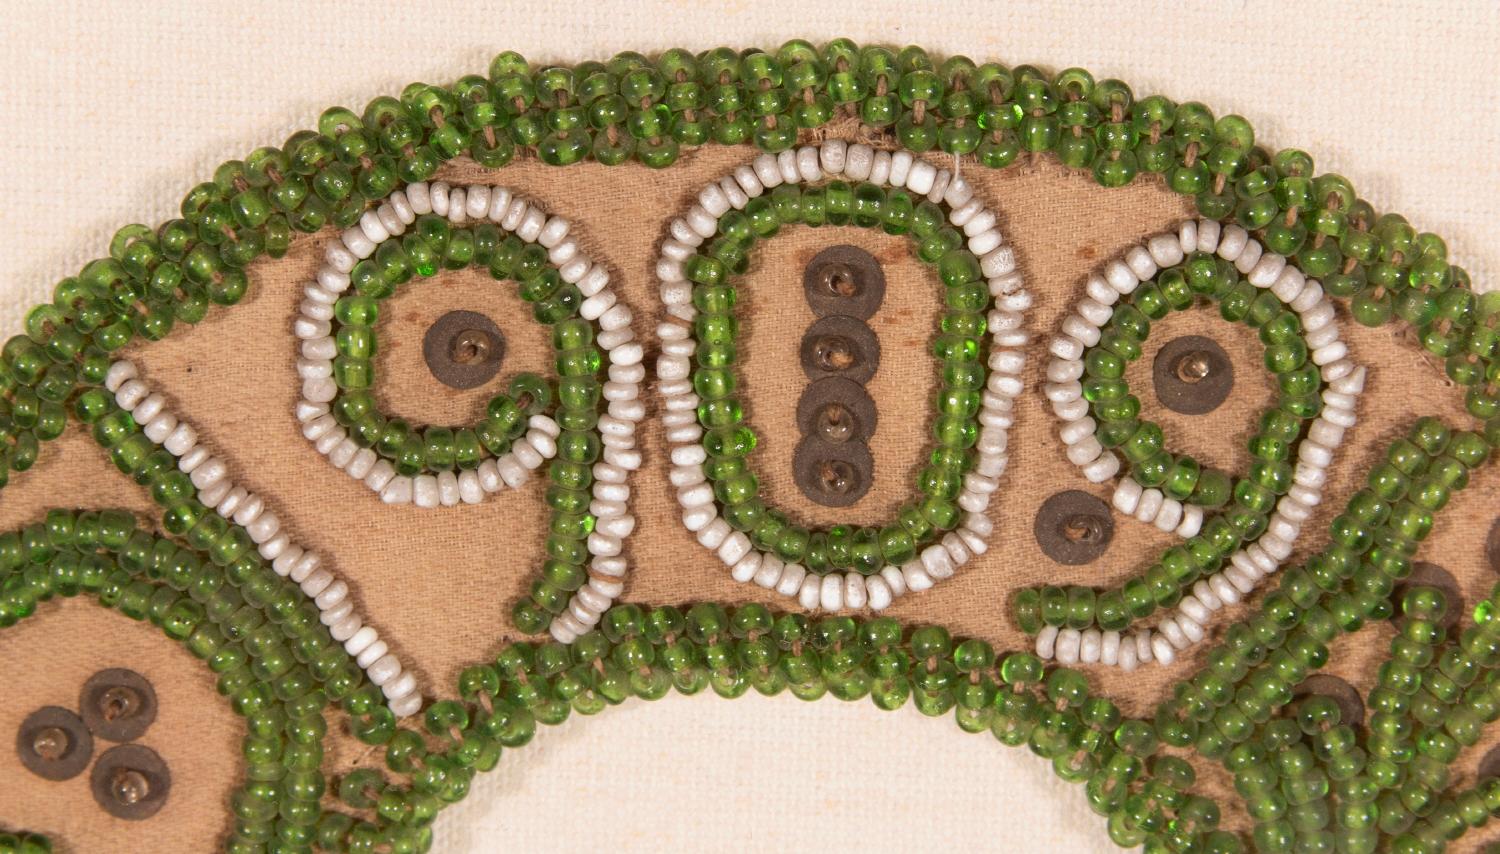 Native American “Good Luck” Horseshoe Beadwork Whimsey, Dated 1909, Iroquois, Upstate, New York

Iroquois Indian beaded whimsy, made in upstate New York, in the Niagara Falls region. Dated 1909, pieces such as this were produced by Native